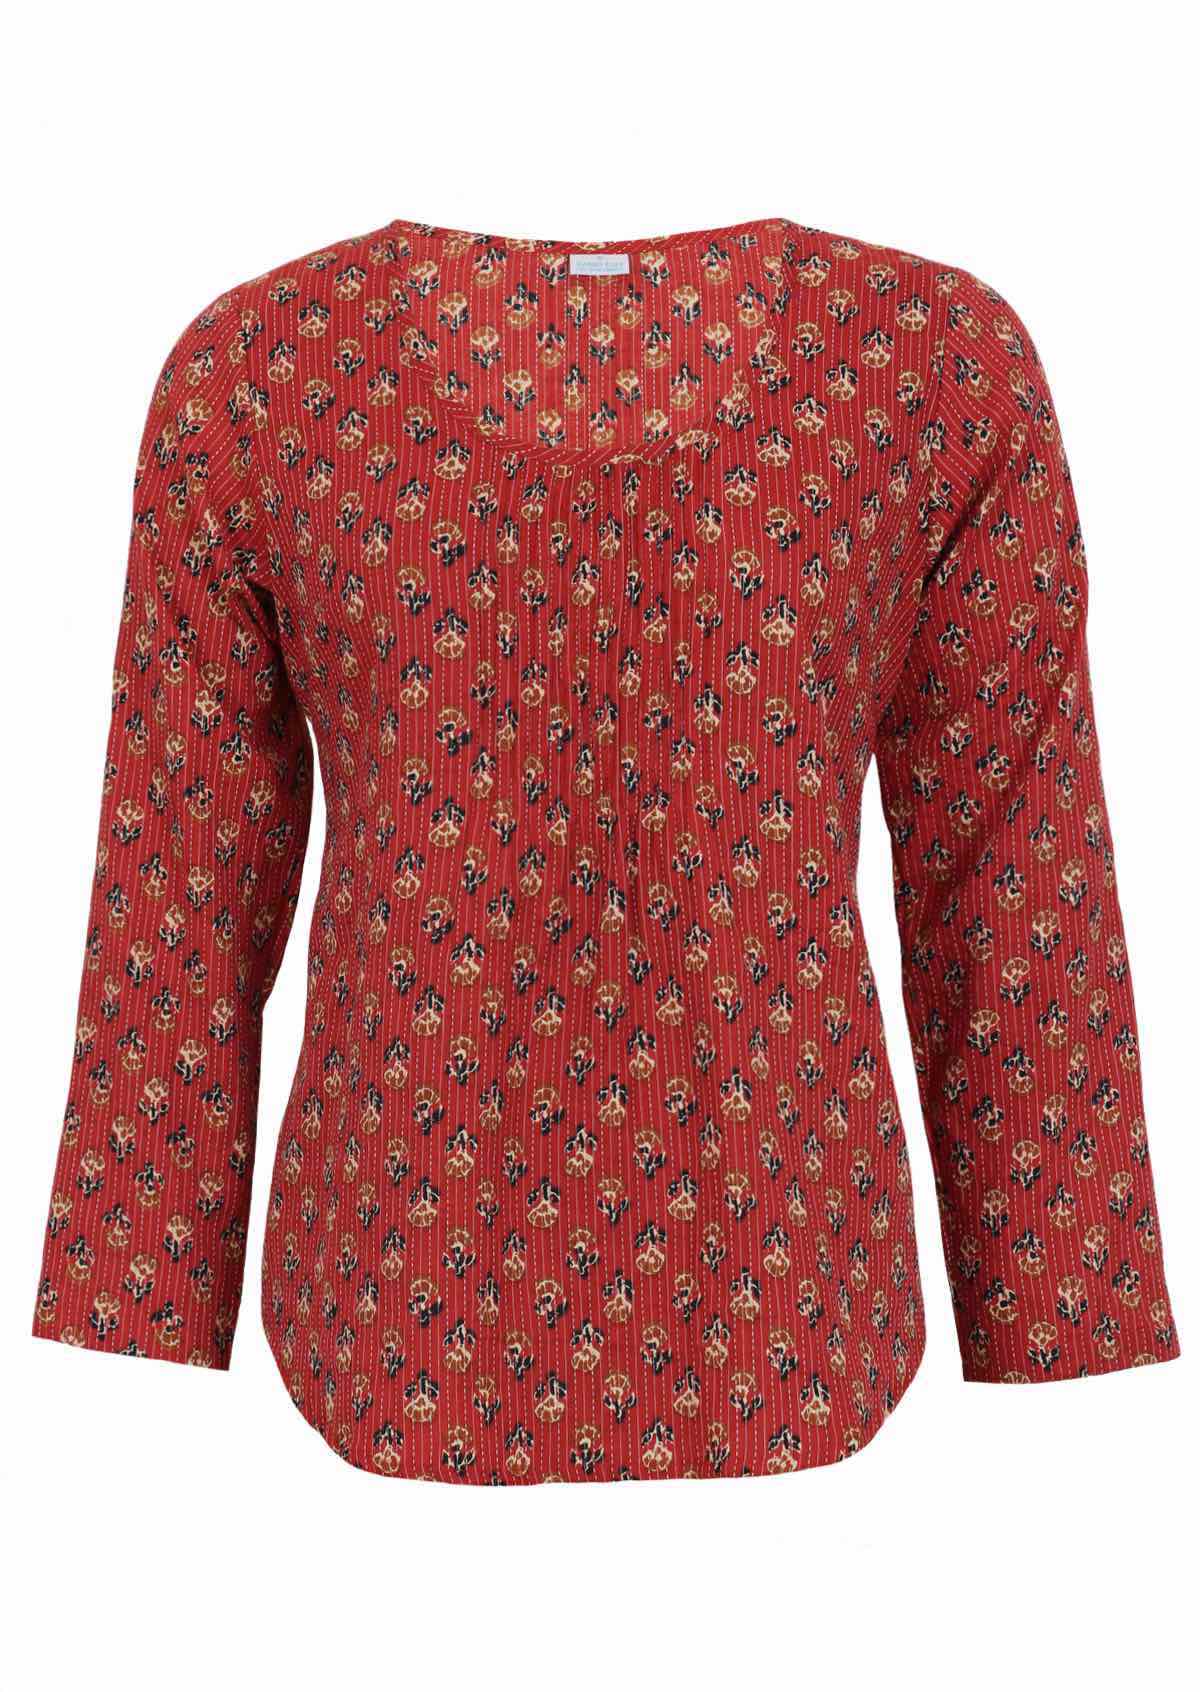 Cotton long sleeve top with flowers and kantha stitches on deep red base